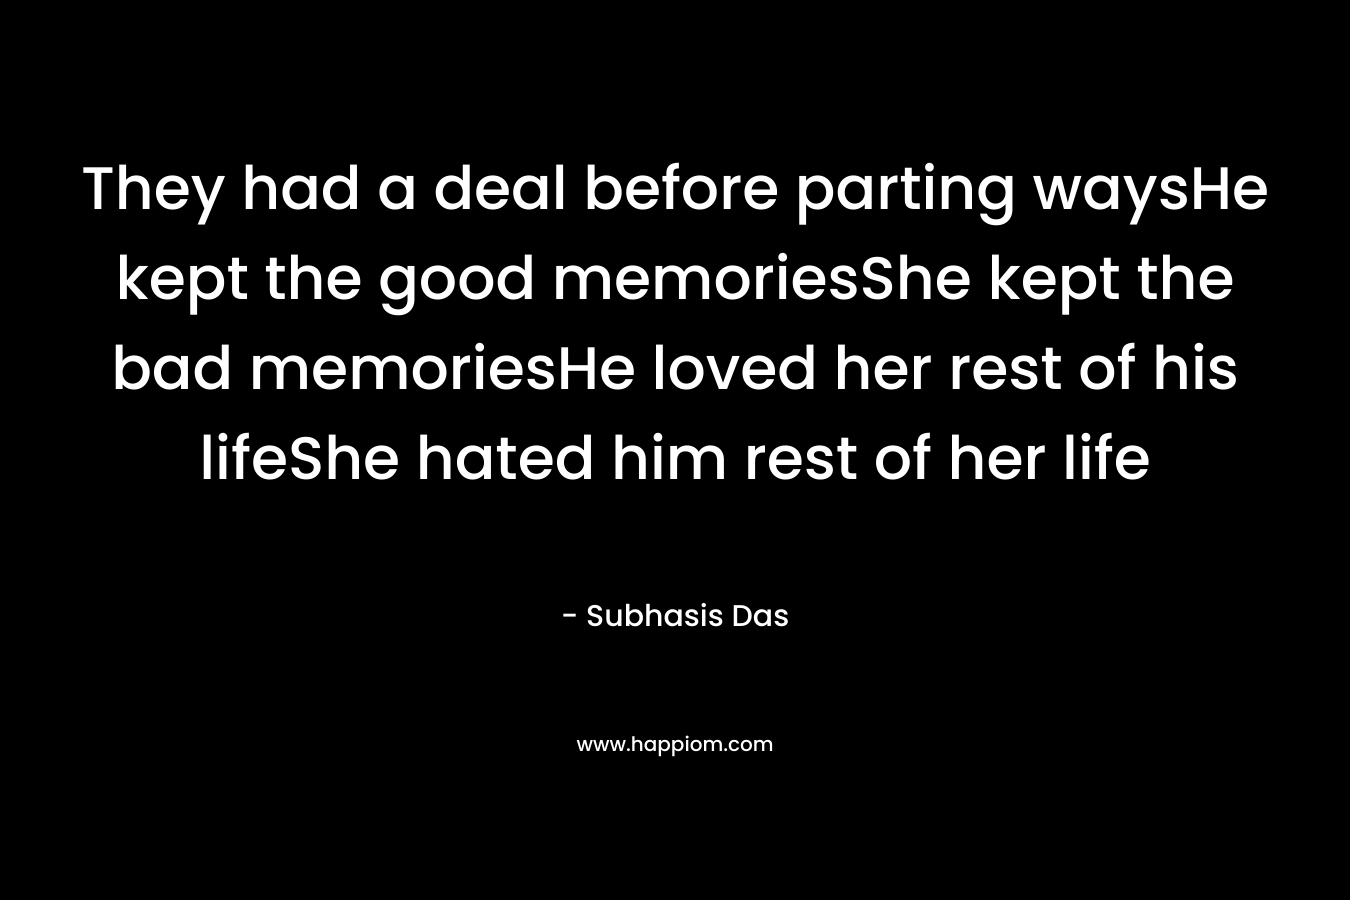 They had a deal before parting waysHe kept the good memoriesShe kept the bad memoriesHe loved her rest of his lifeShe hated him rest of her life – Subhasis Das